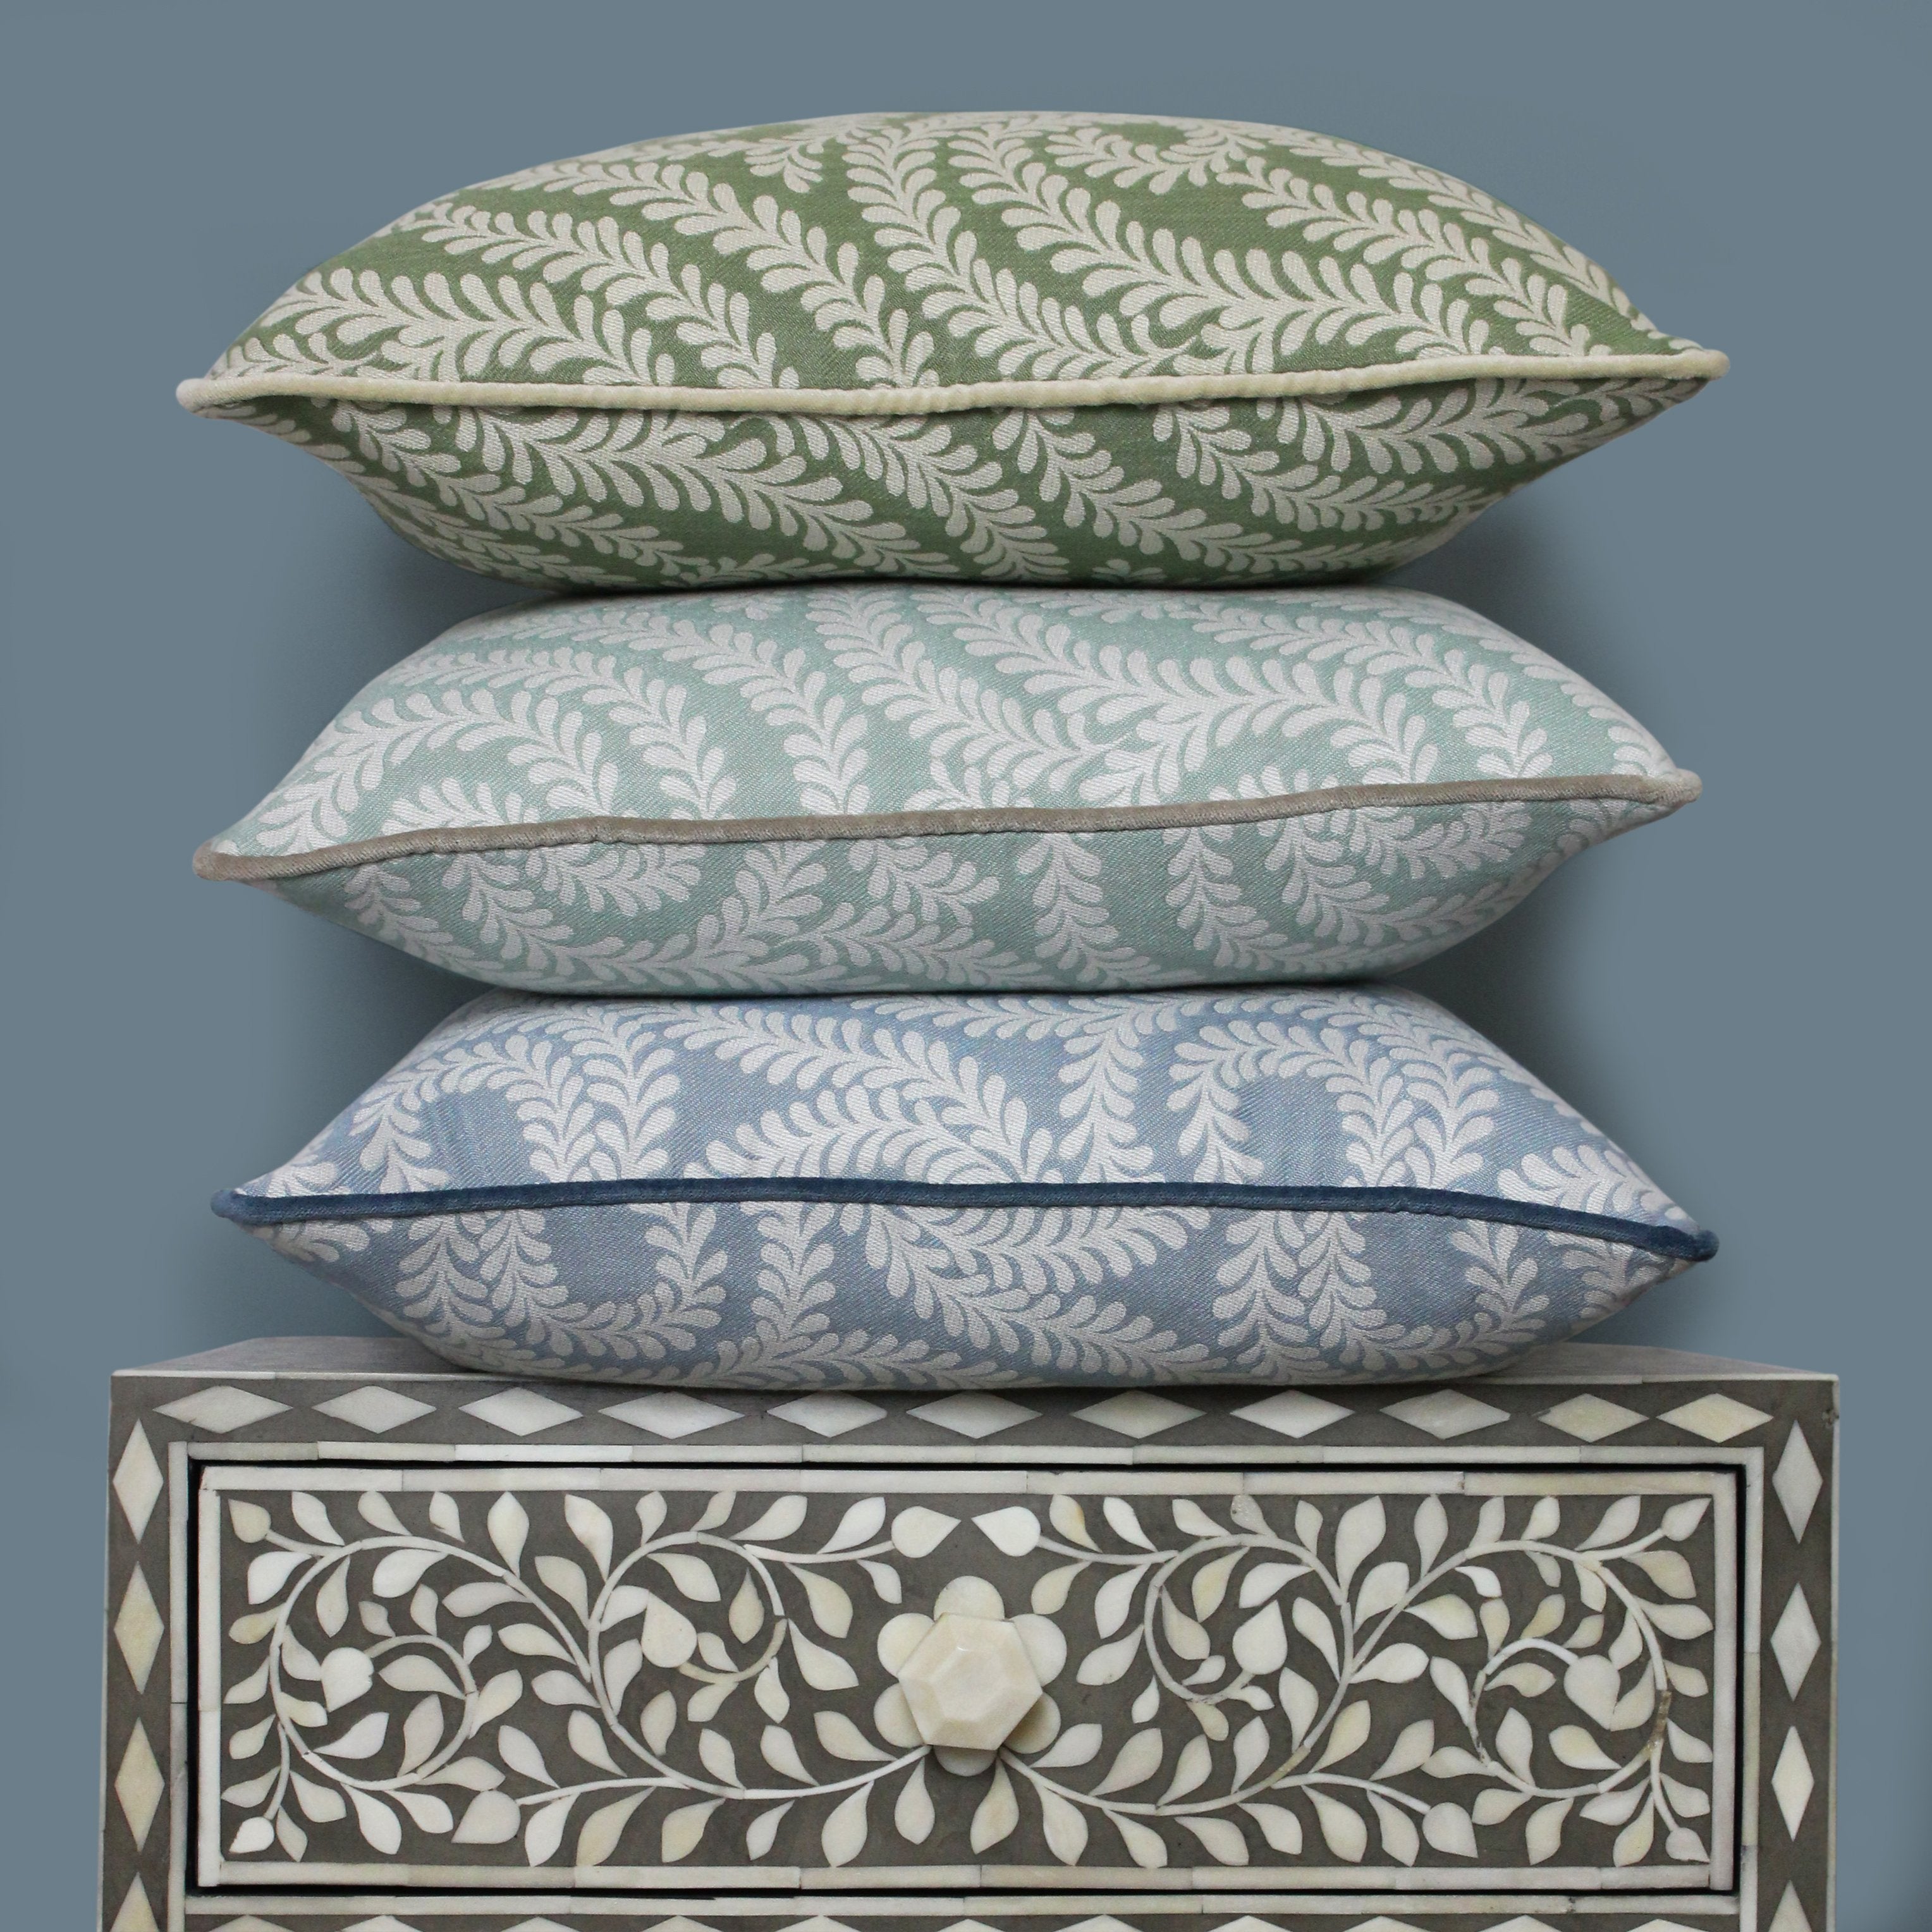 McAlister Textiles Little Leaf Sage Green Cushion Cushions and Covers 